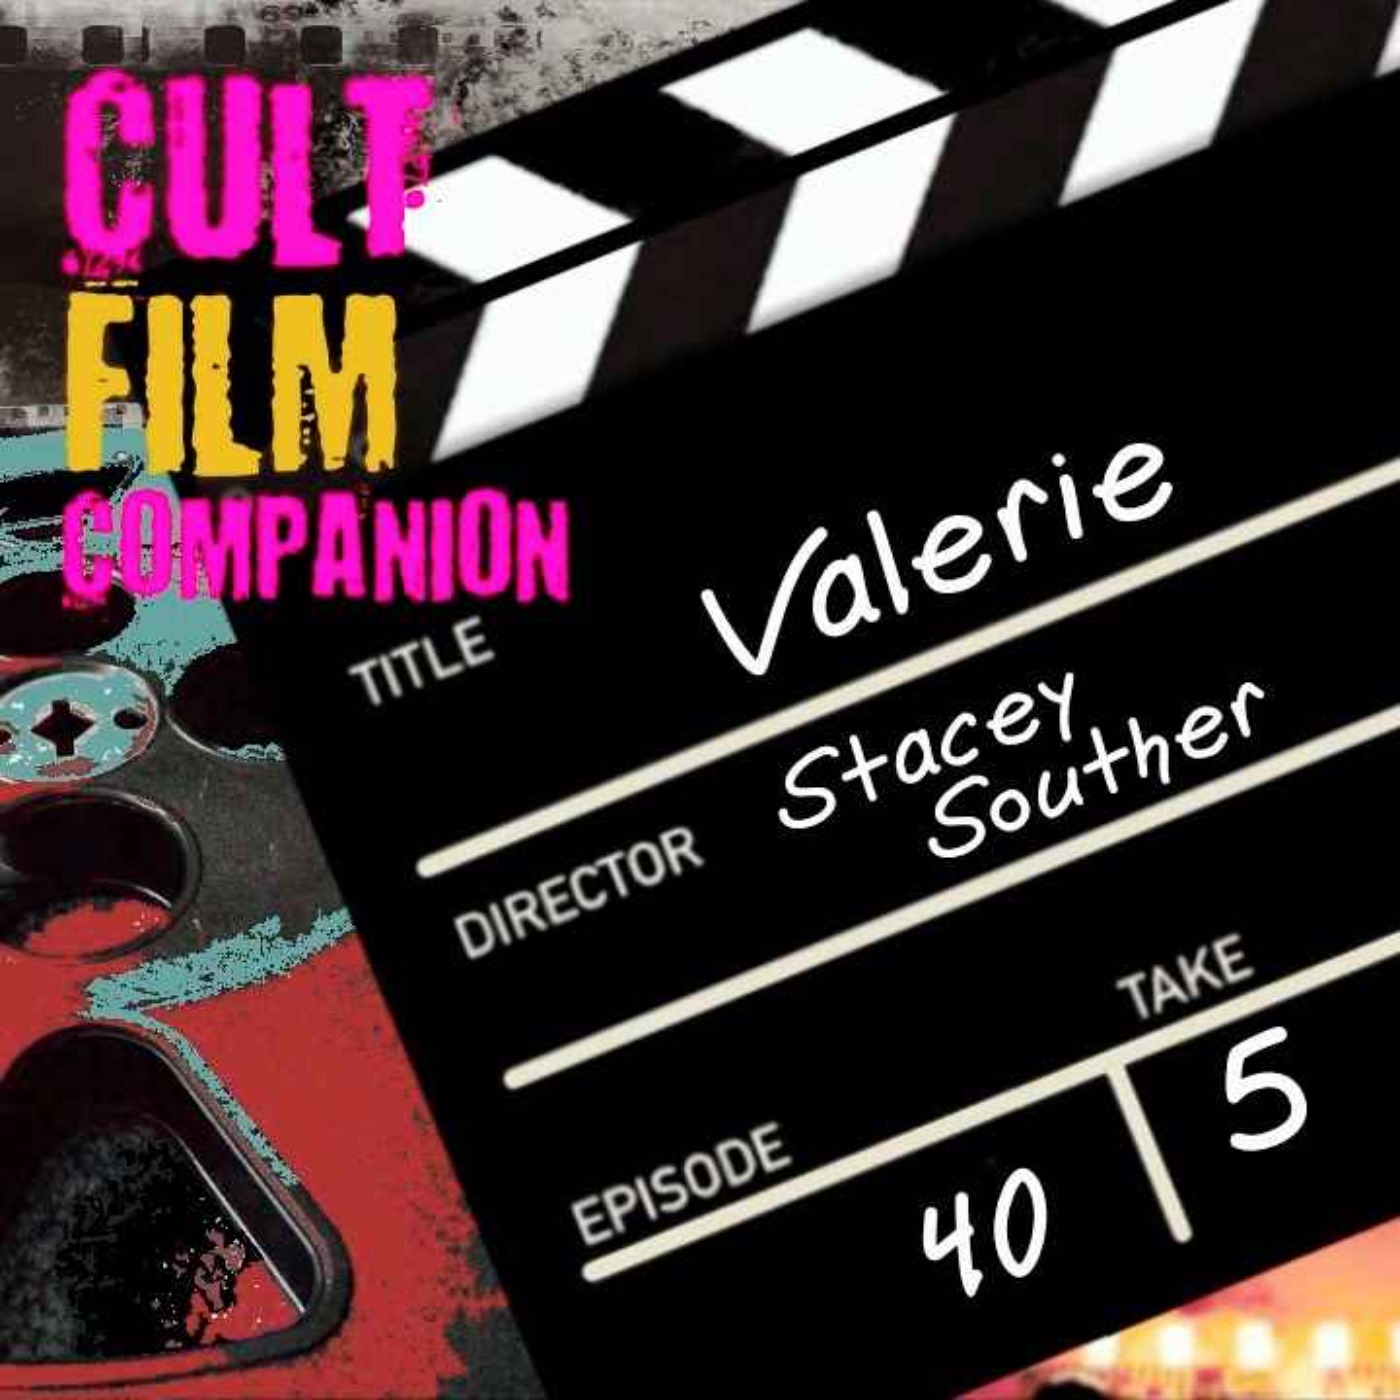 Ep. 40 Valerie directed by Stacey Souther